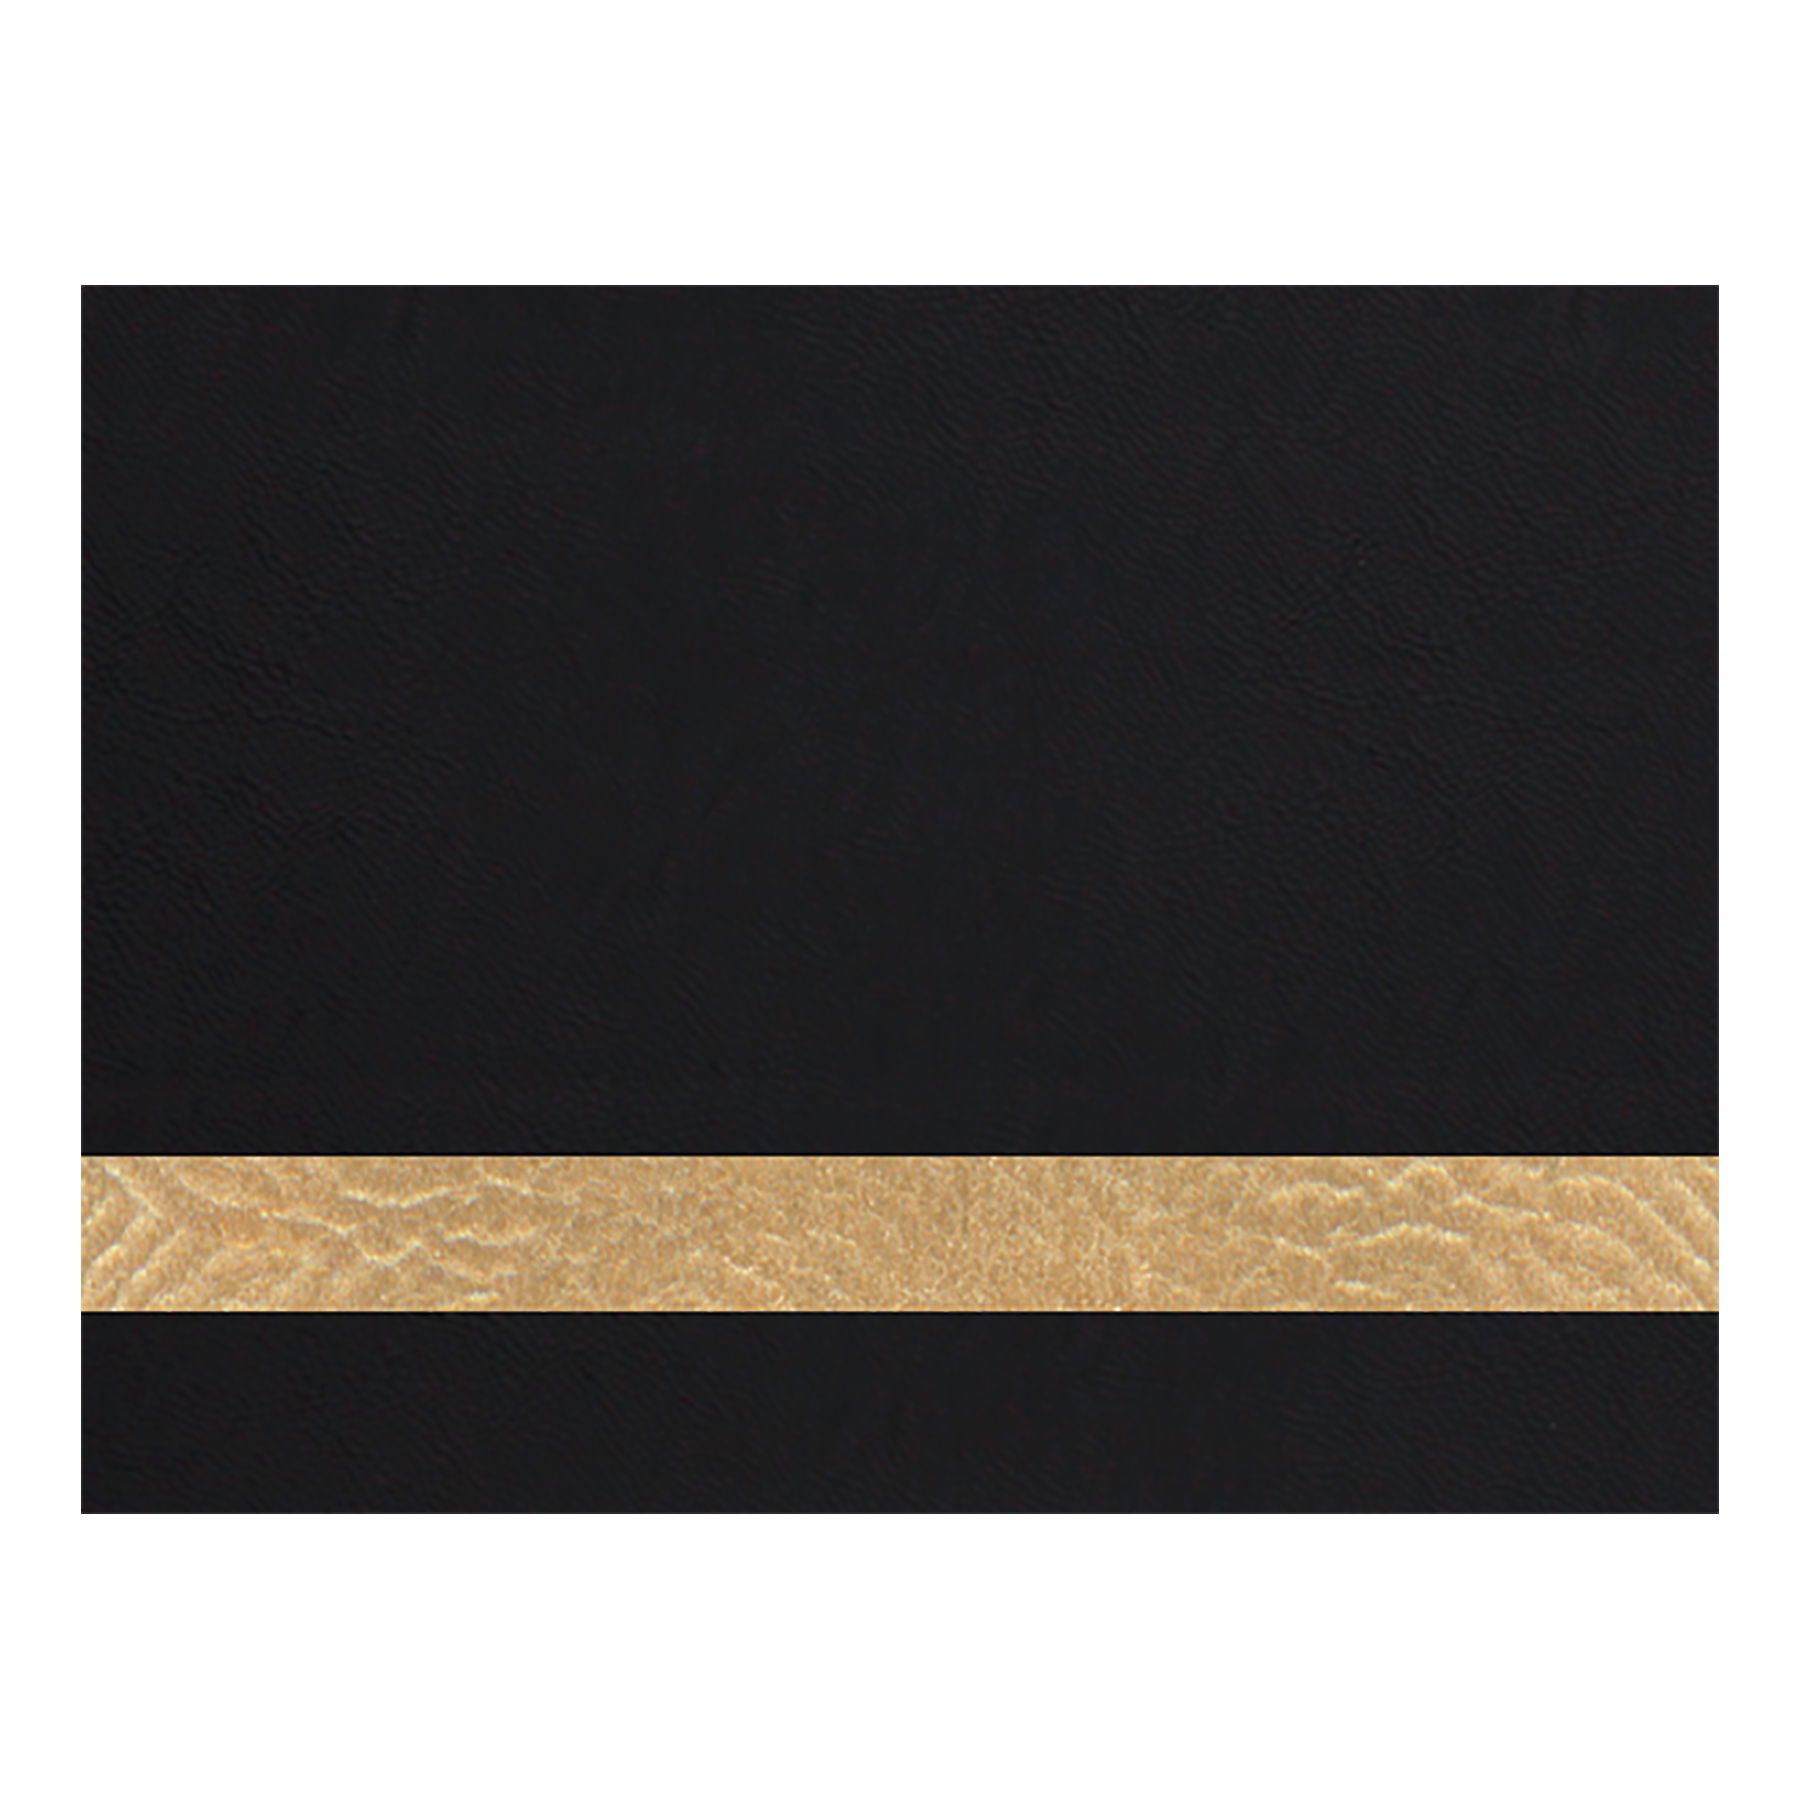 PRE-ORDER! Full Size Laserable Leatherette Sheet Stock, Epilog Fusion Pro Laser Engravers (Available Jan. 2022) Engraving Supplies Craftworks NW Fusion Pro 24 (24" x 24") Black/Gold 